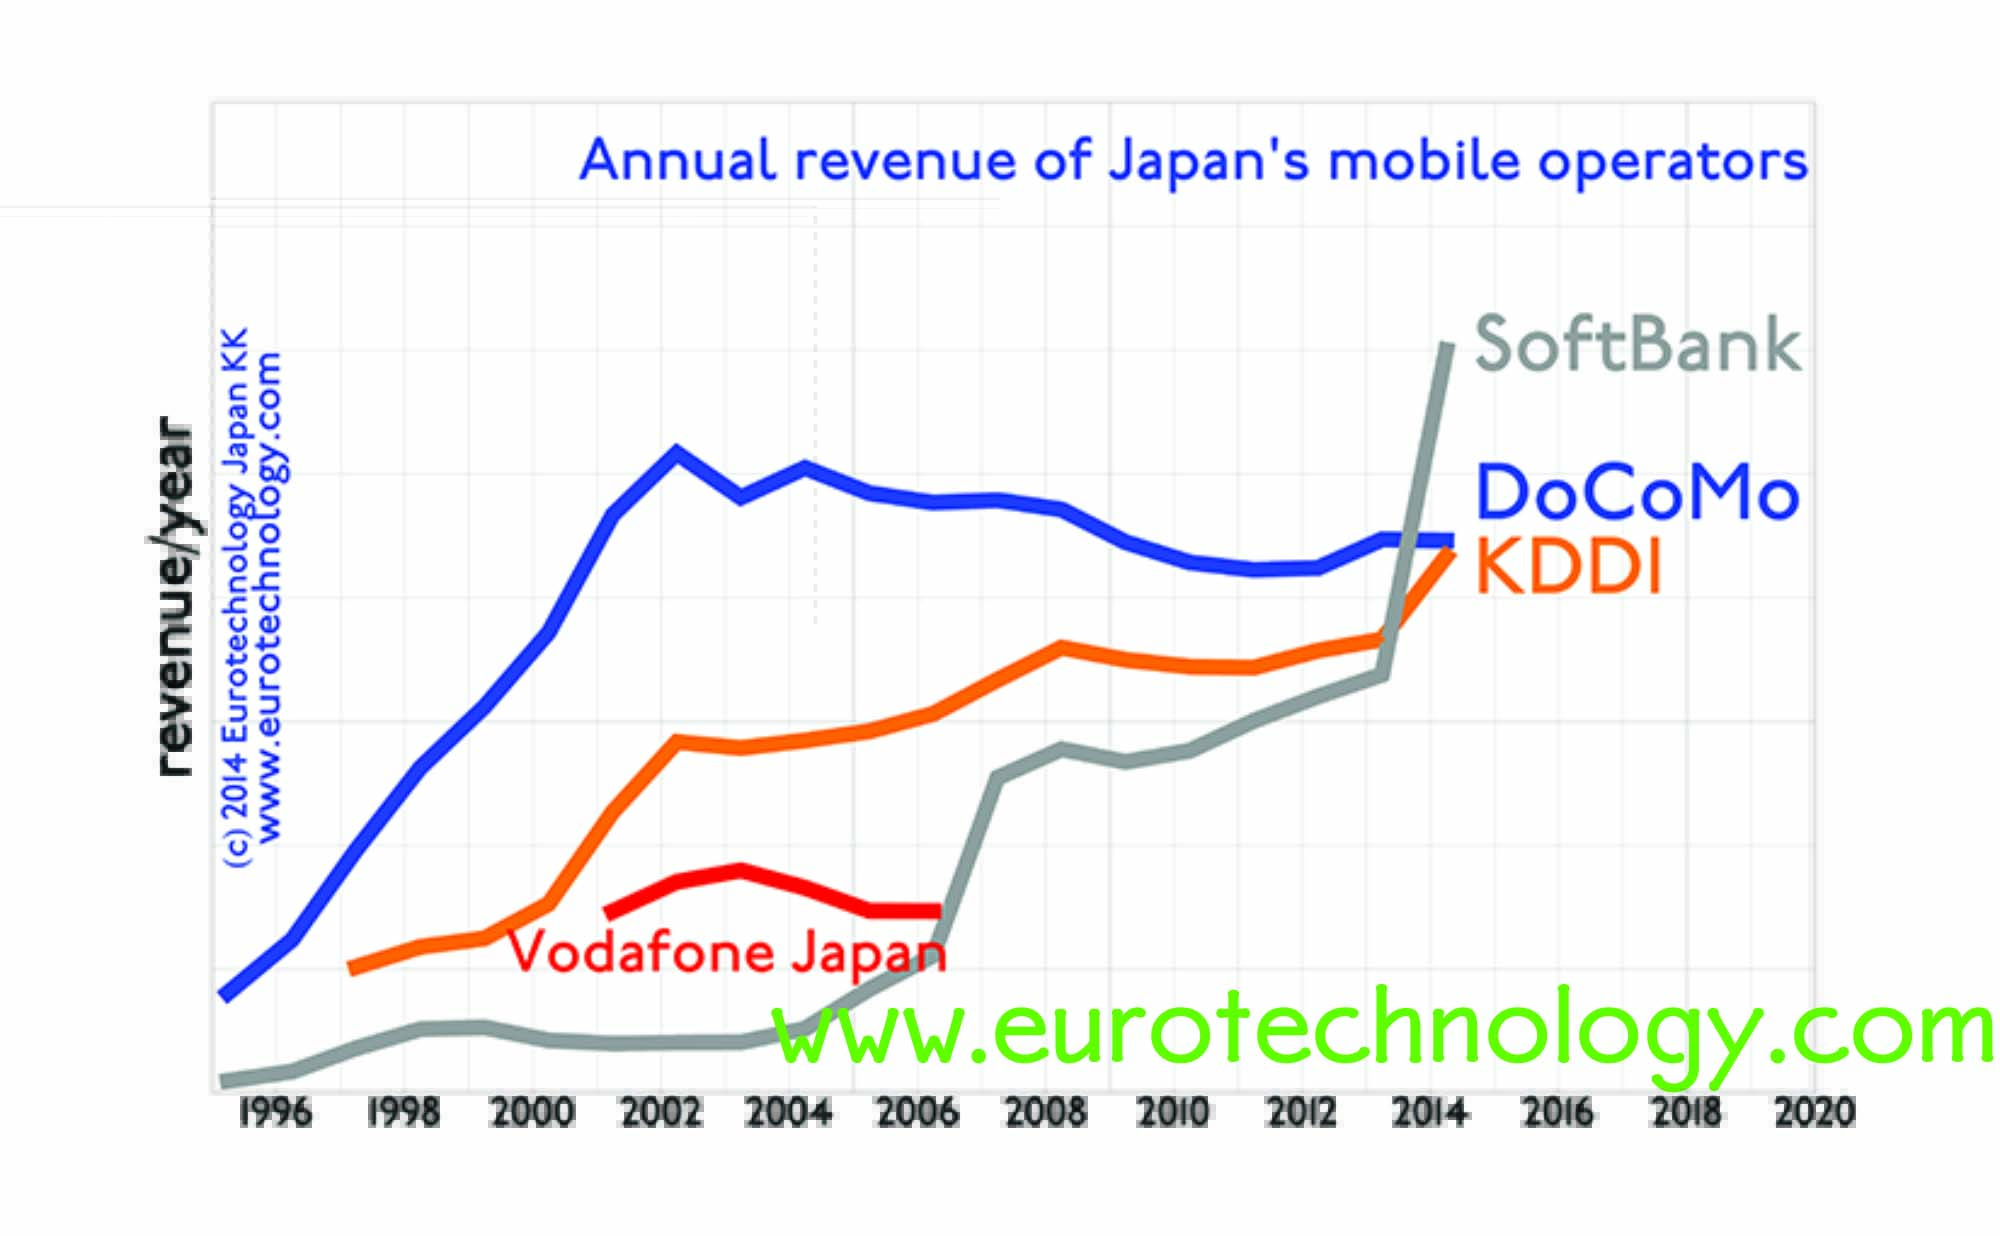 SoftBank overtakes Docomo and KDDI in revenues and income and market cap